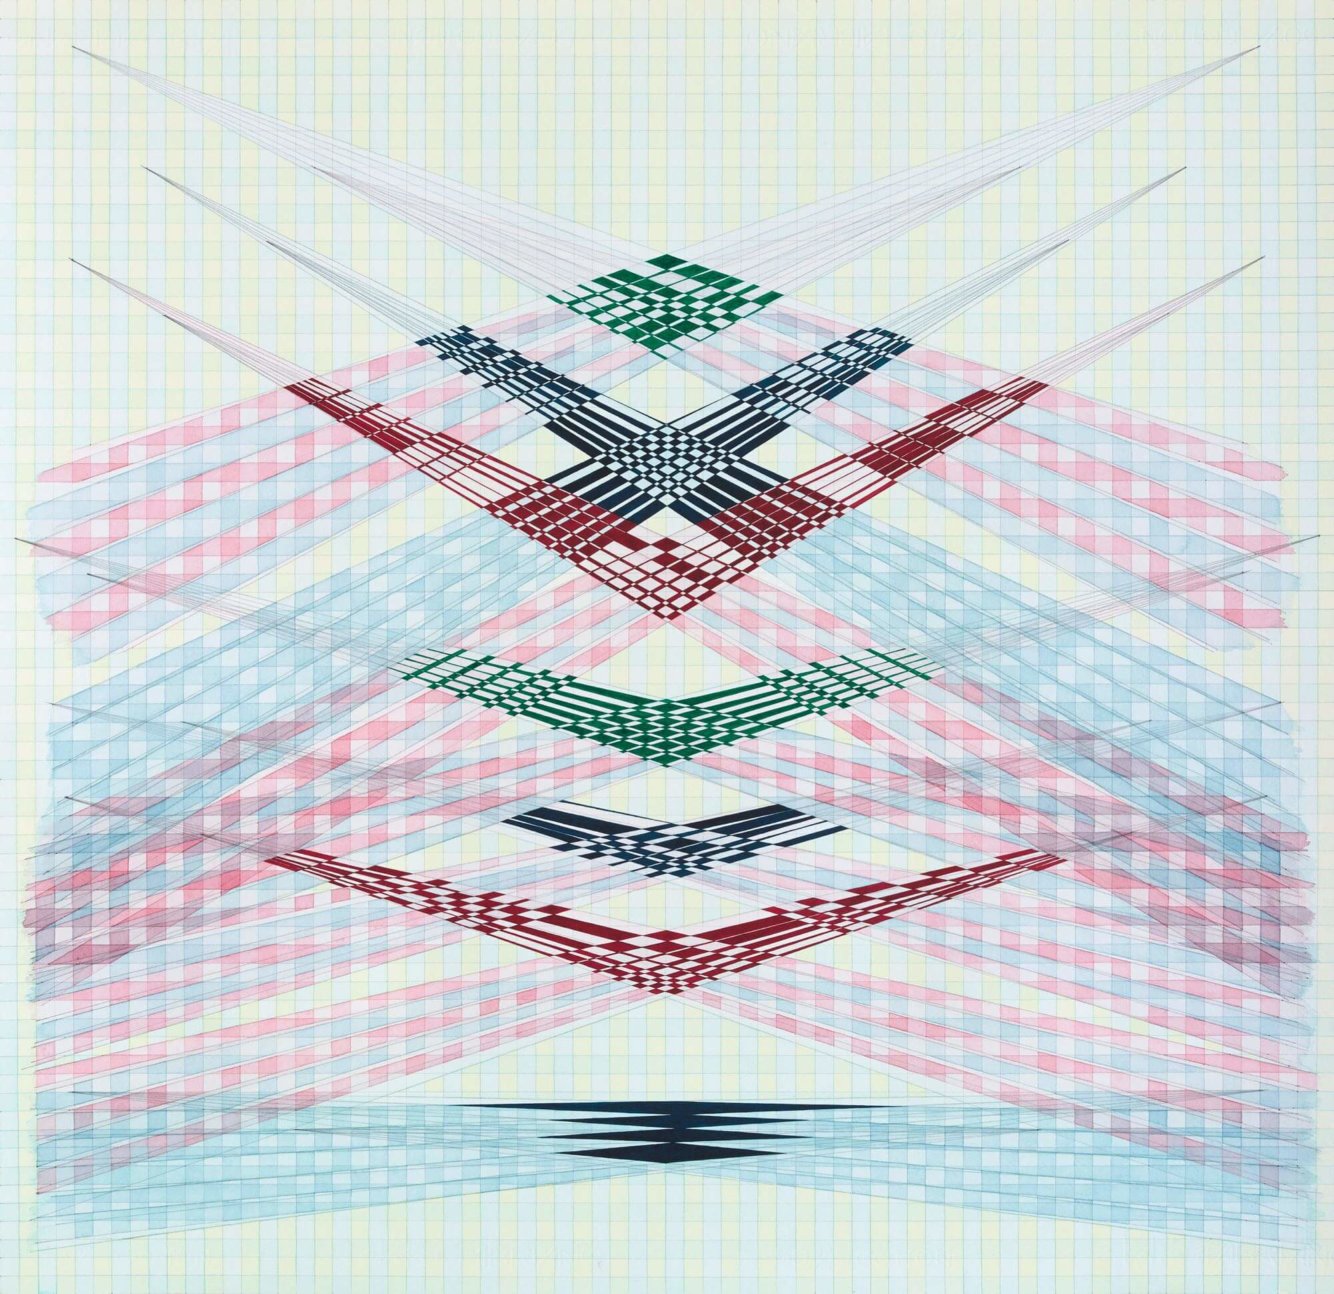 A single watercolour work of geometric forms. A pale blue-green pixel grid with dark forms sitting on top.